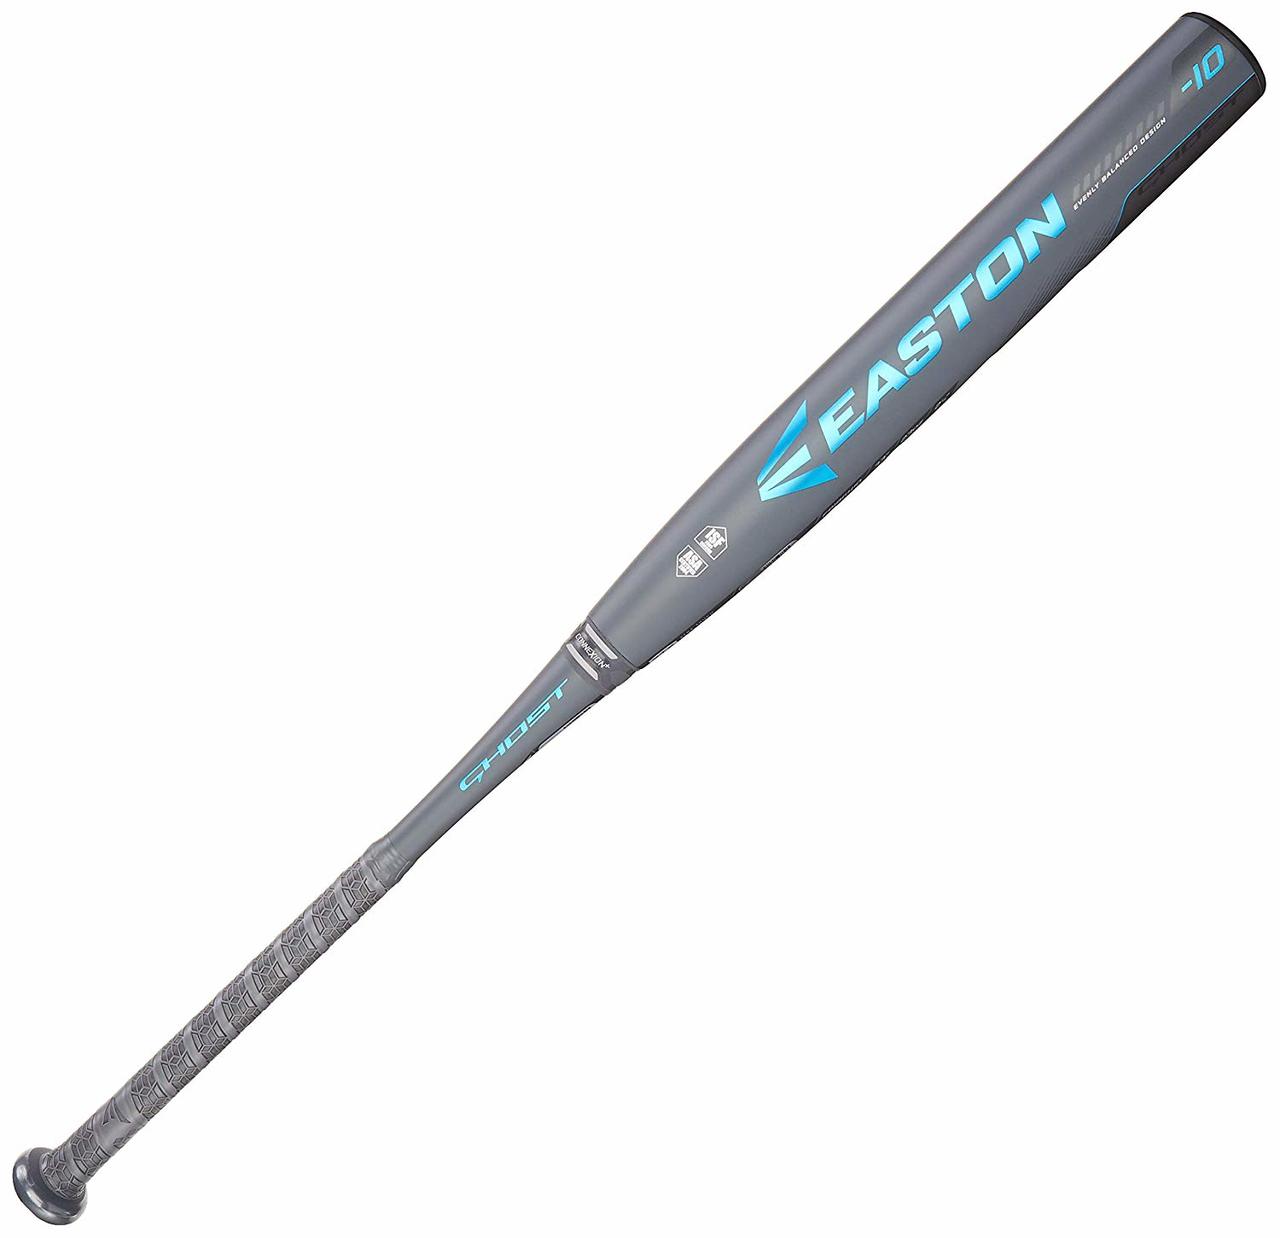 easton-ghost-asa-fastpitch-softball-bat-33-in-23-oz-fp18gh10 FP18GH10-3323 Easton 628412172582 Lowest barrel compression in the game best-in-class acoustics at impact Maximum